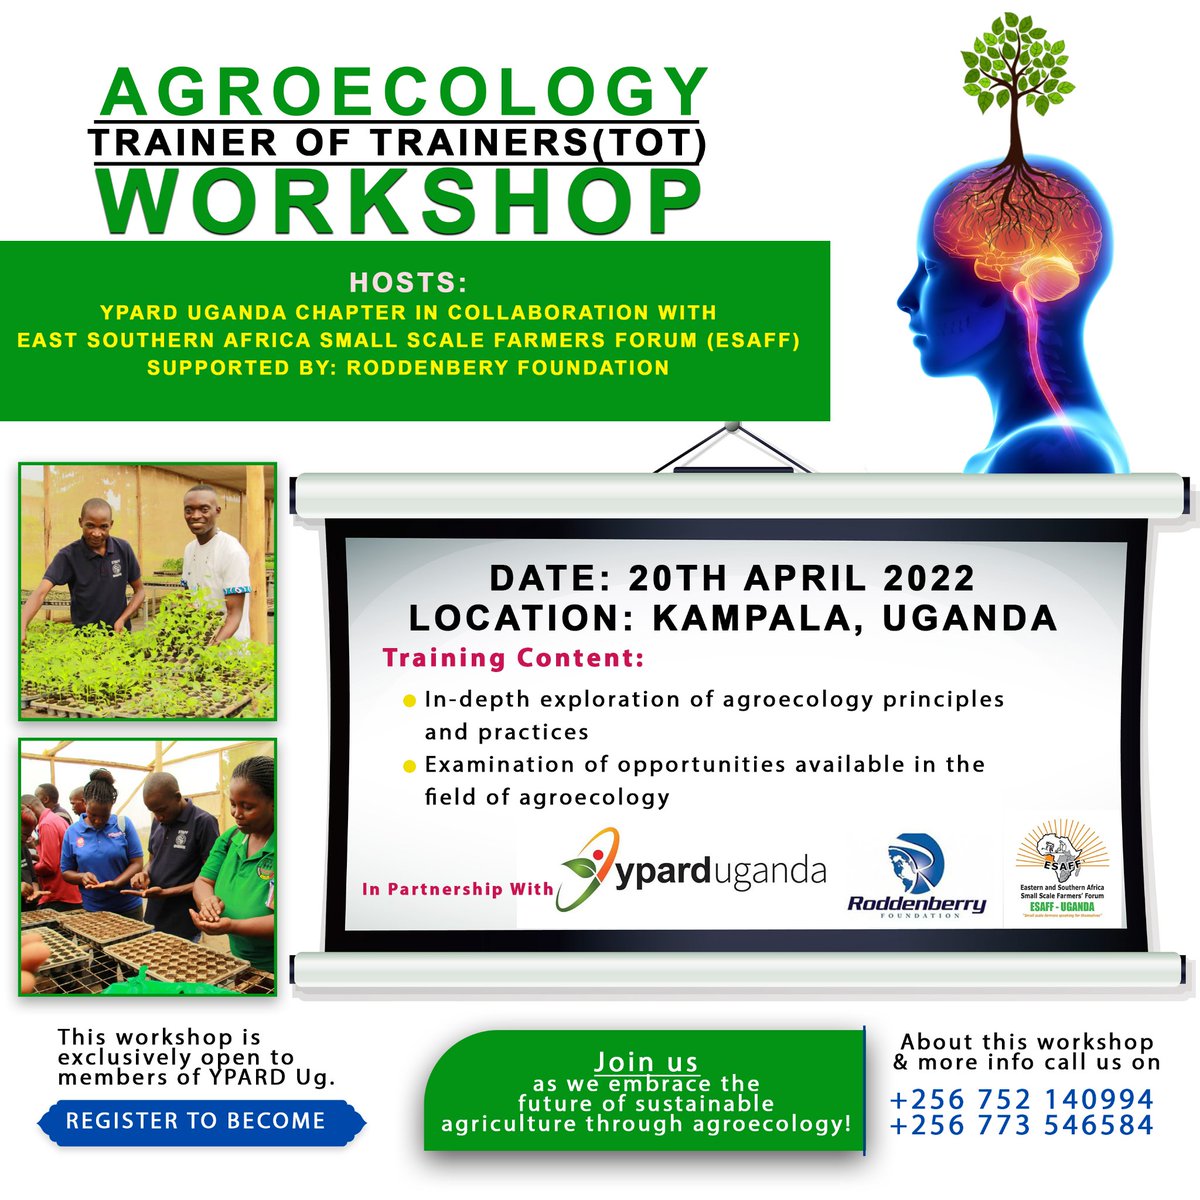 .@YPARDUganda in collaboration with East Southern Africa Small-scale Farmers Forum (@ESAFFUG) have organized a one day trainer of trainers workshop to equip youth with knowledge and information on Agroecology. The training is funded by @RoddenberryFdn 📆 20th April 2024.